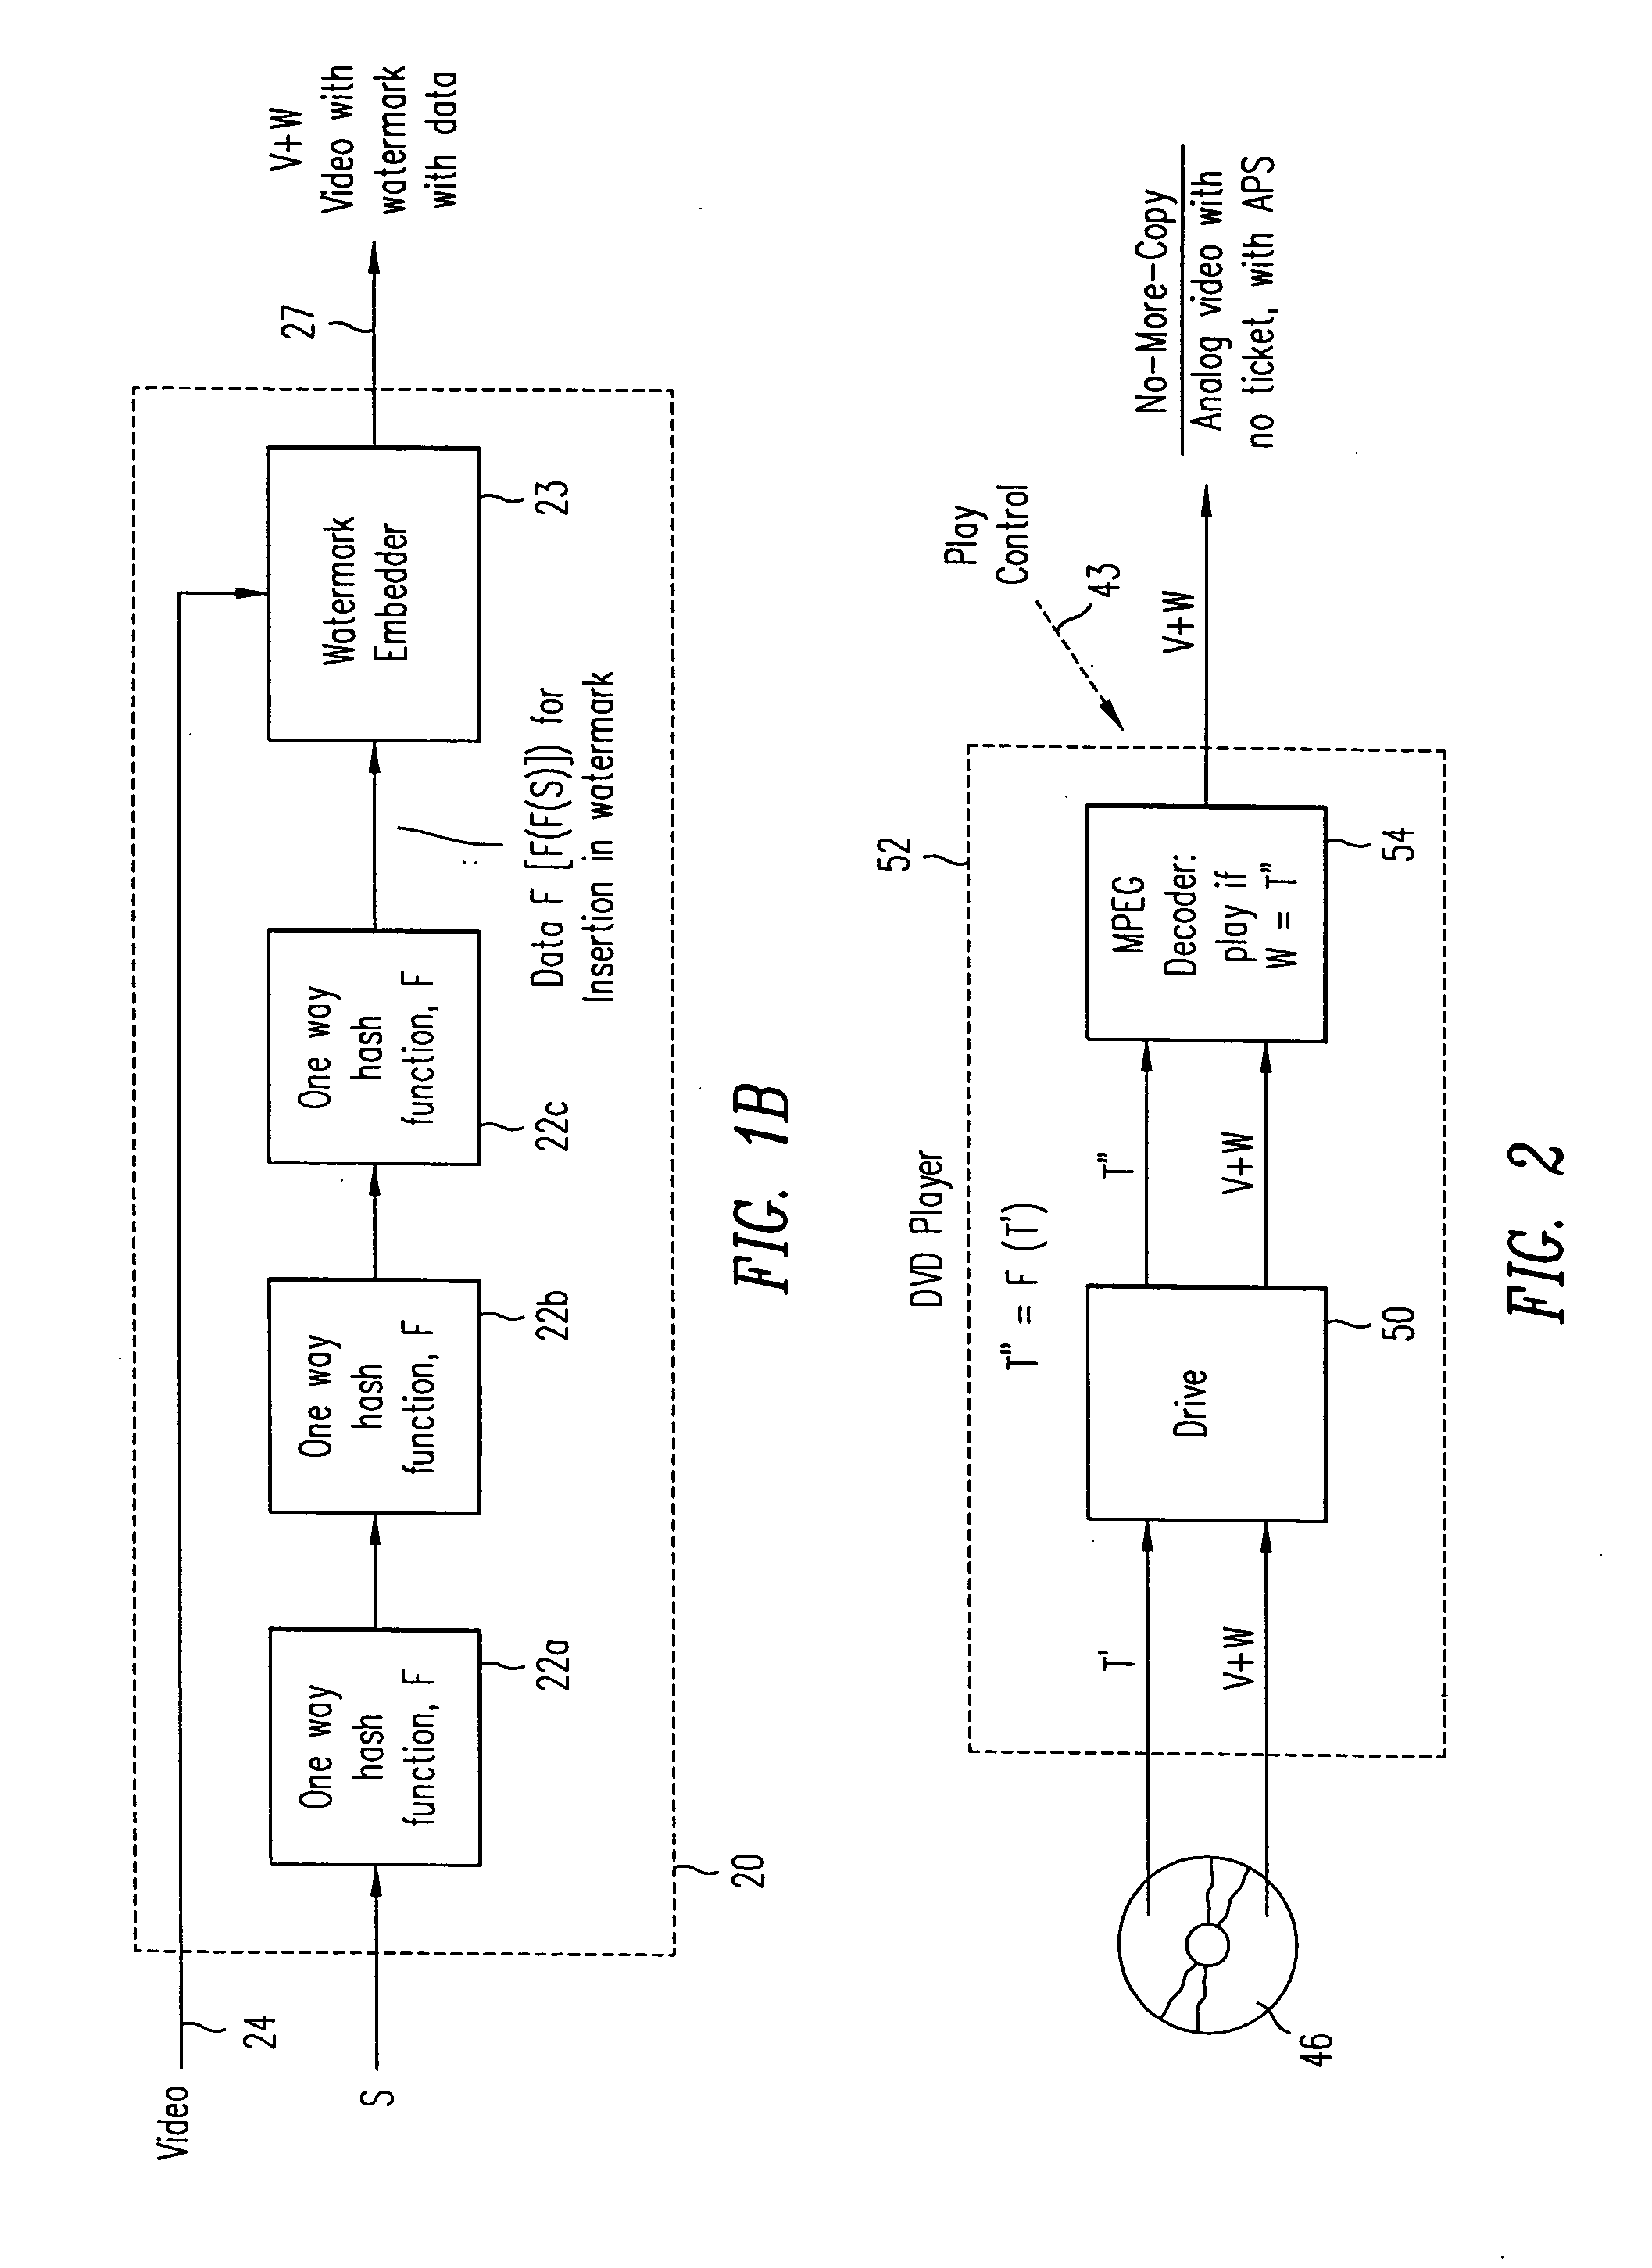 Method and apparatus for enhanced audio/video services with two watermarks